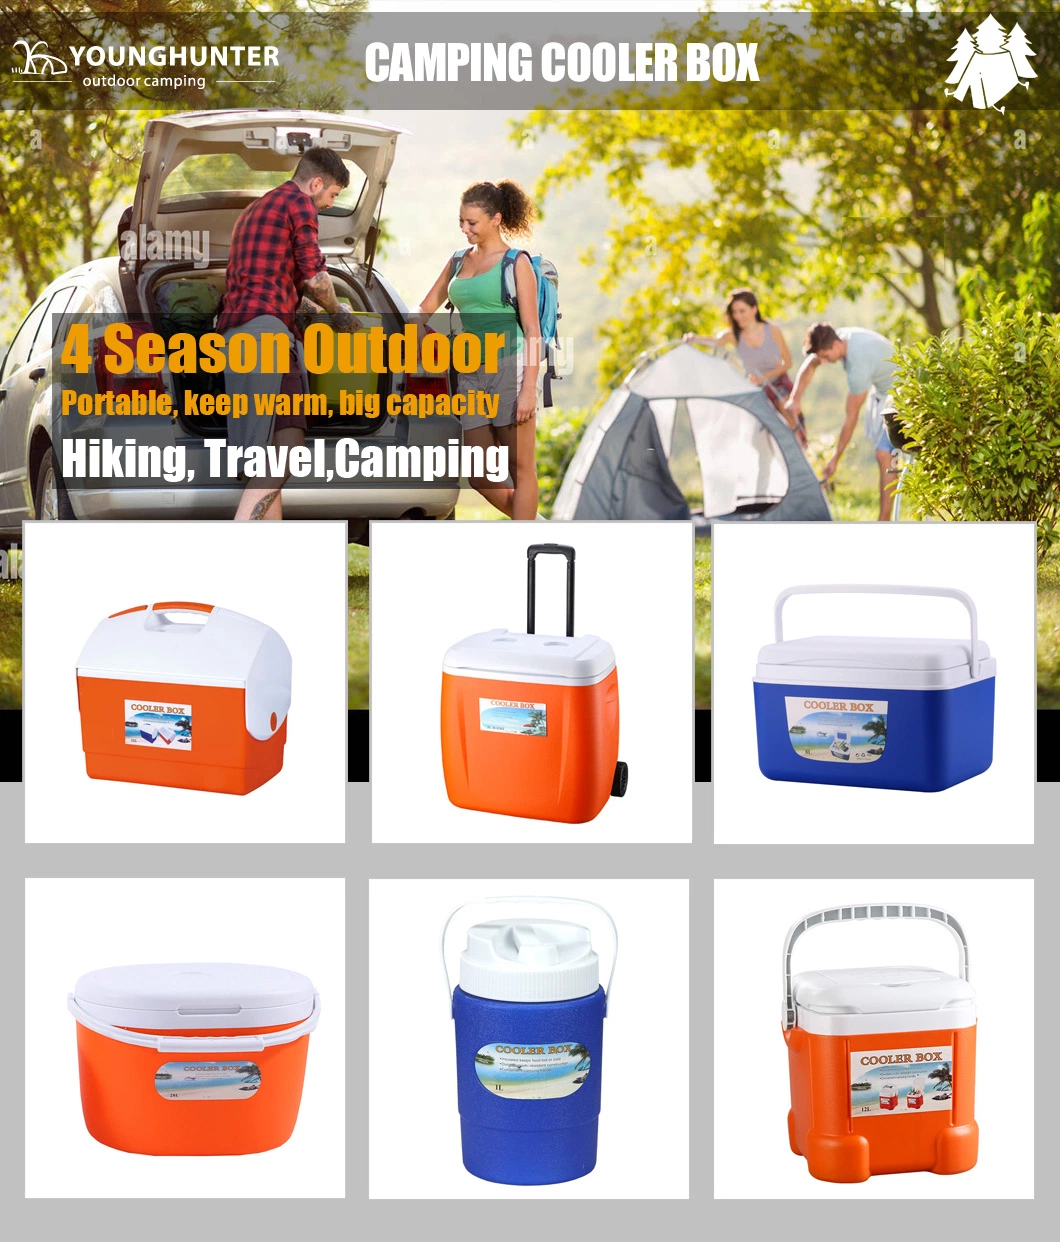 8L Outdoor Incubator Portable Drinks Food Storage Box Car Cold Ice Fishing Box Cooler Mini Fridge Rectangle Ice Bucket for Home BBQ Picnic